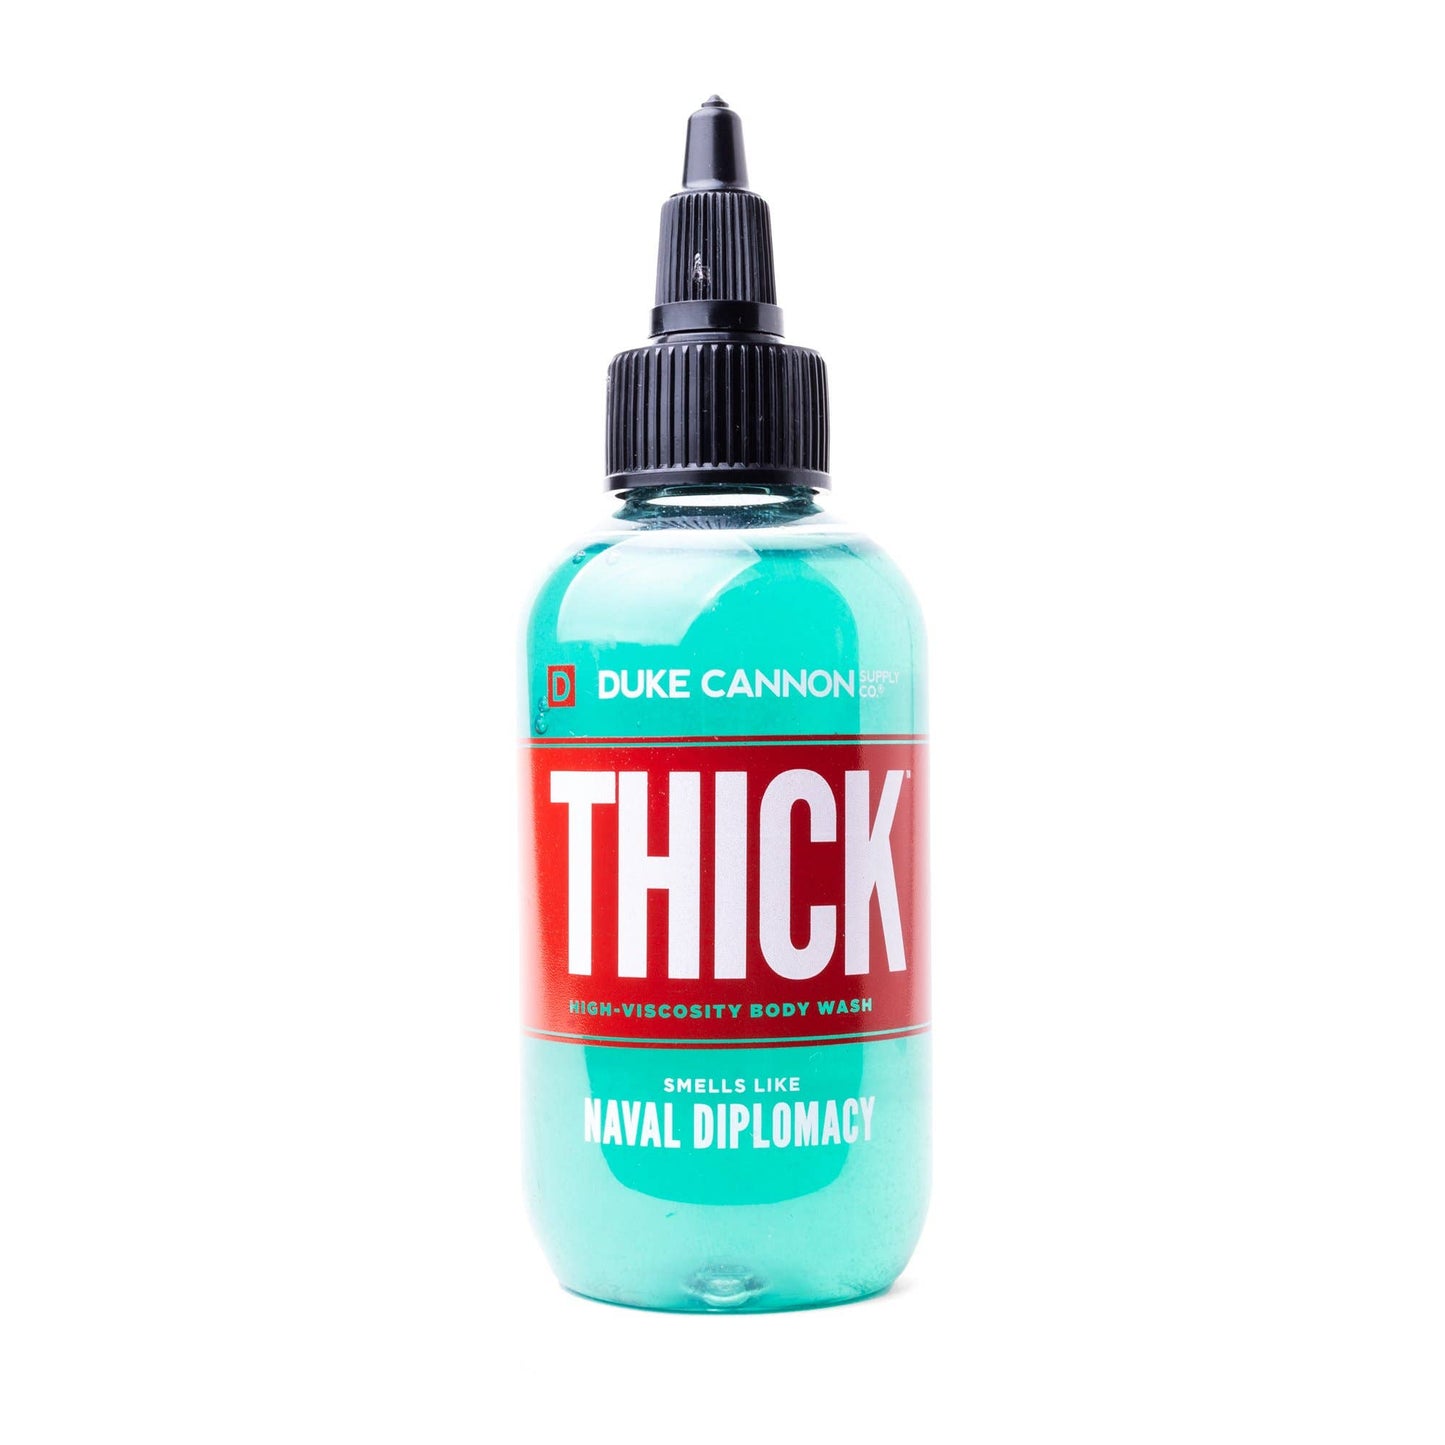 Thick Body Wash Travel Size - Naval Diplomacy Self-Care Duke Cannon   